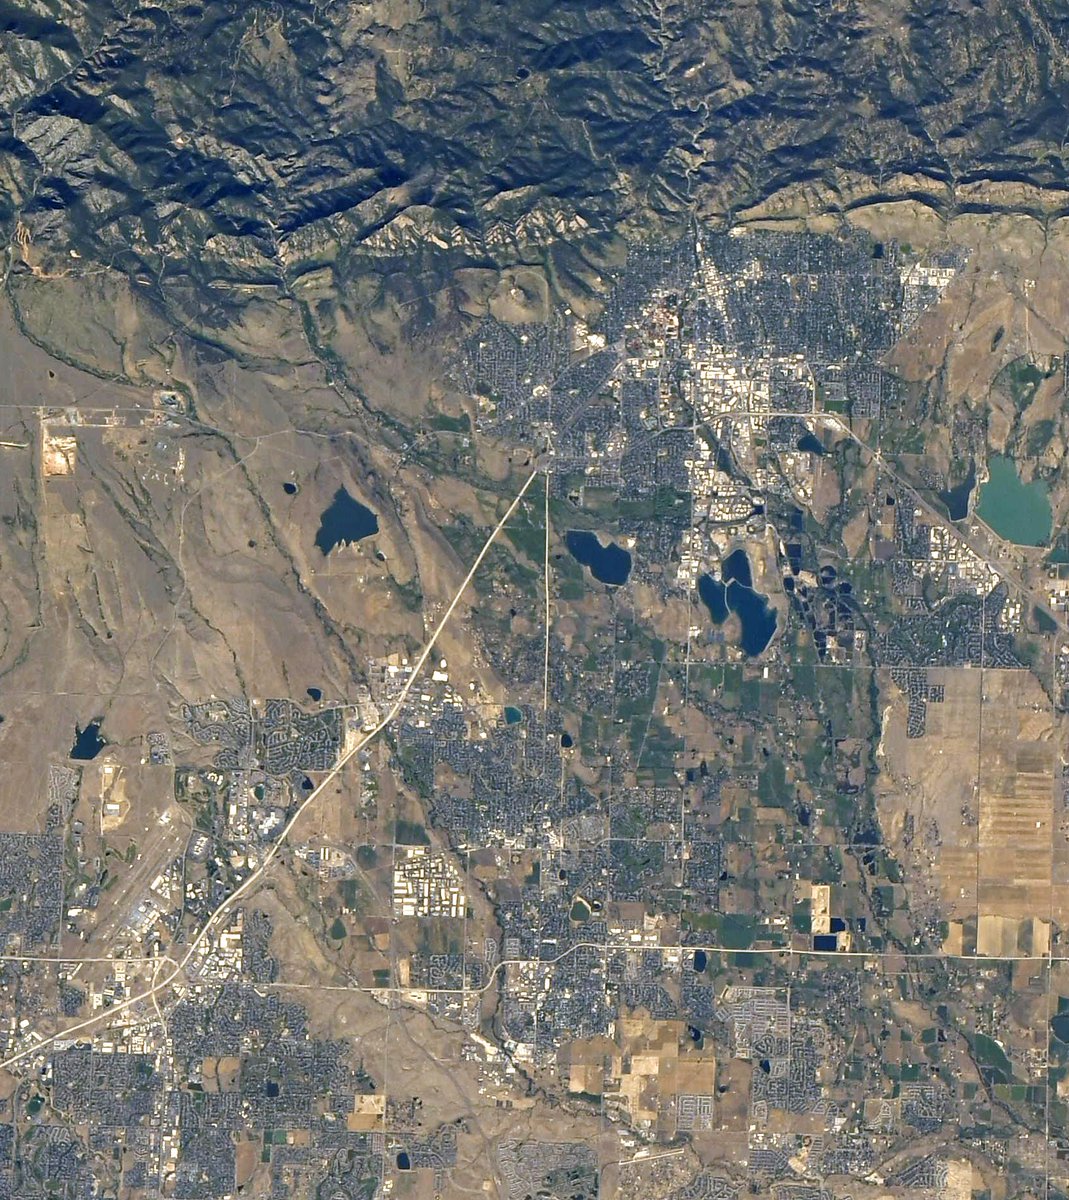 Reason number 5280 why I’m grateful to call Boulder, CO home: the Flatirons make it easy to spot from the @Space_Station! A gorgeous view from every elevation.